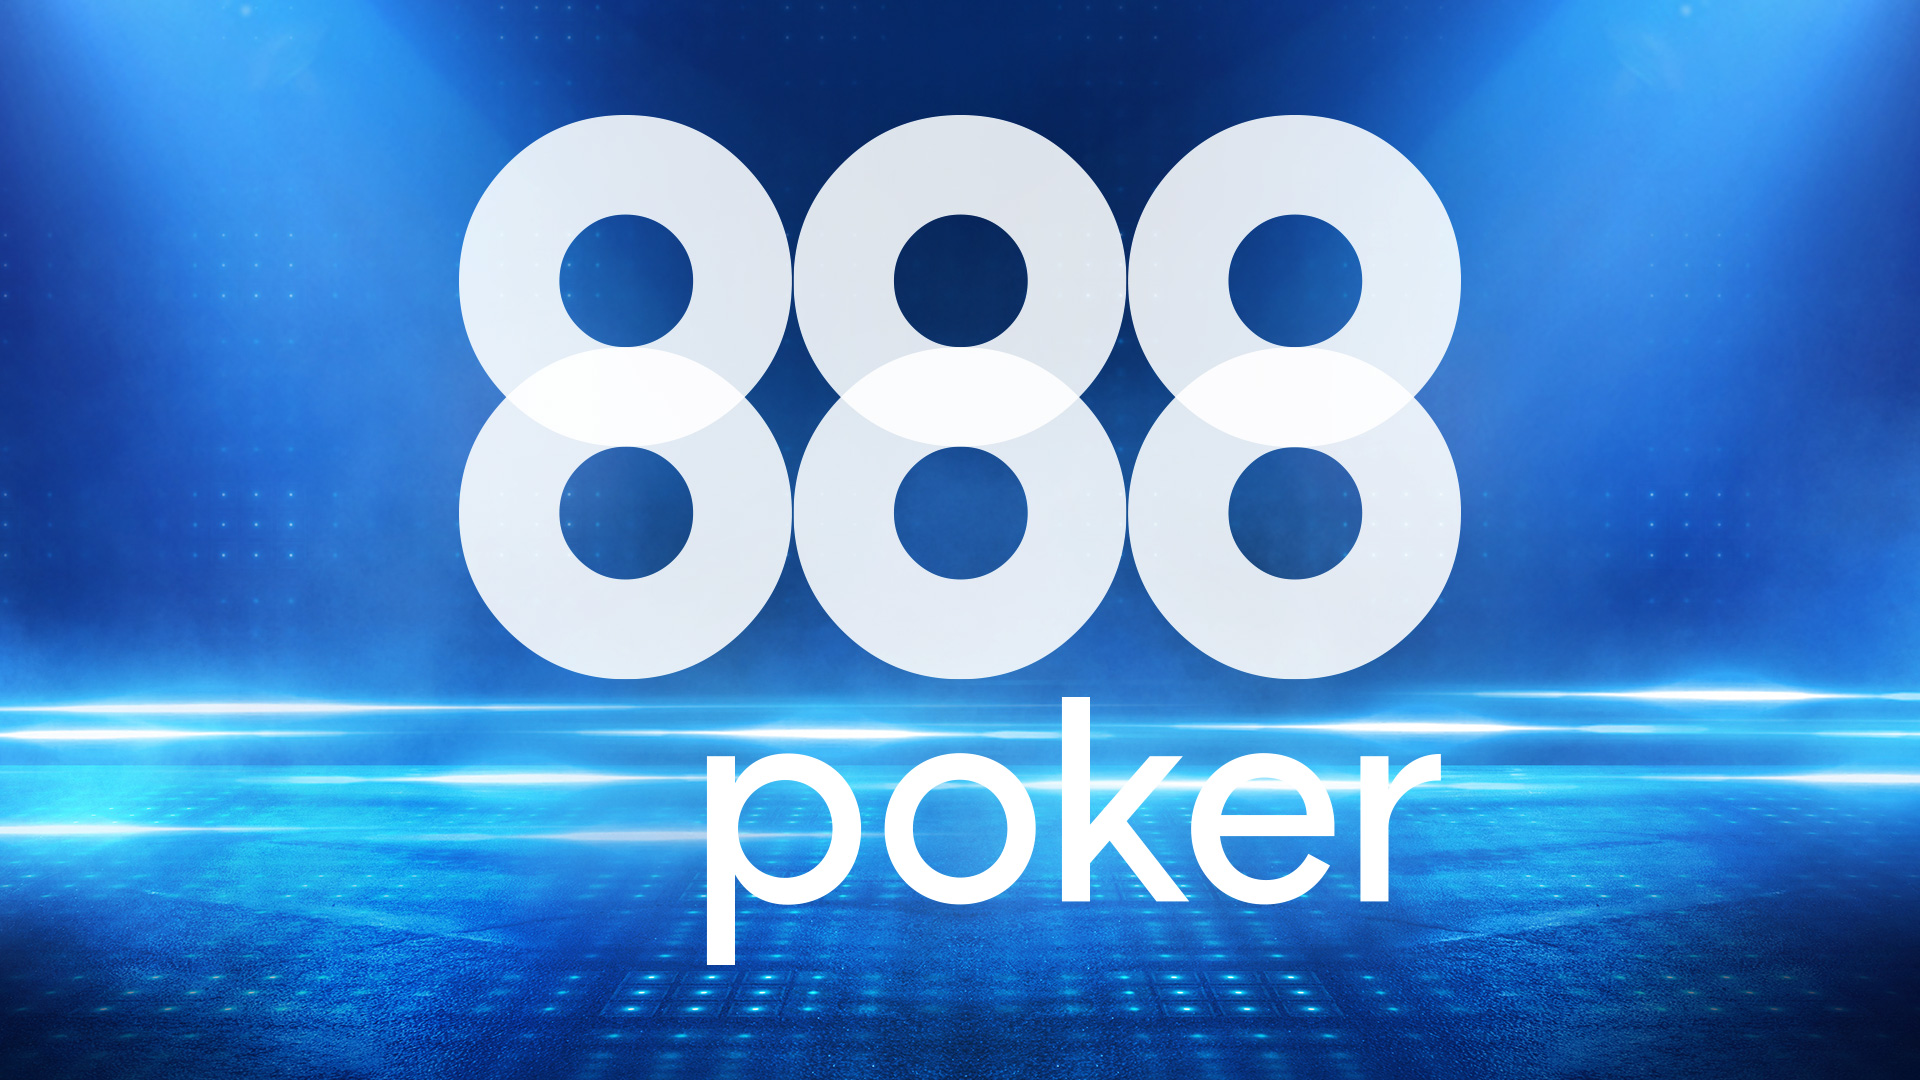 888 Inks Online Gaming Extension with Delaware Lottery, Preserving Interstate Poker Network